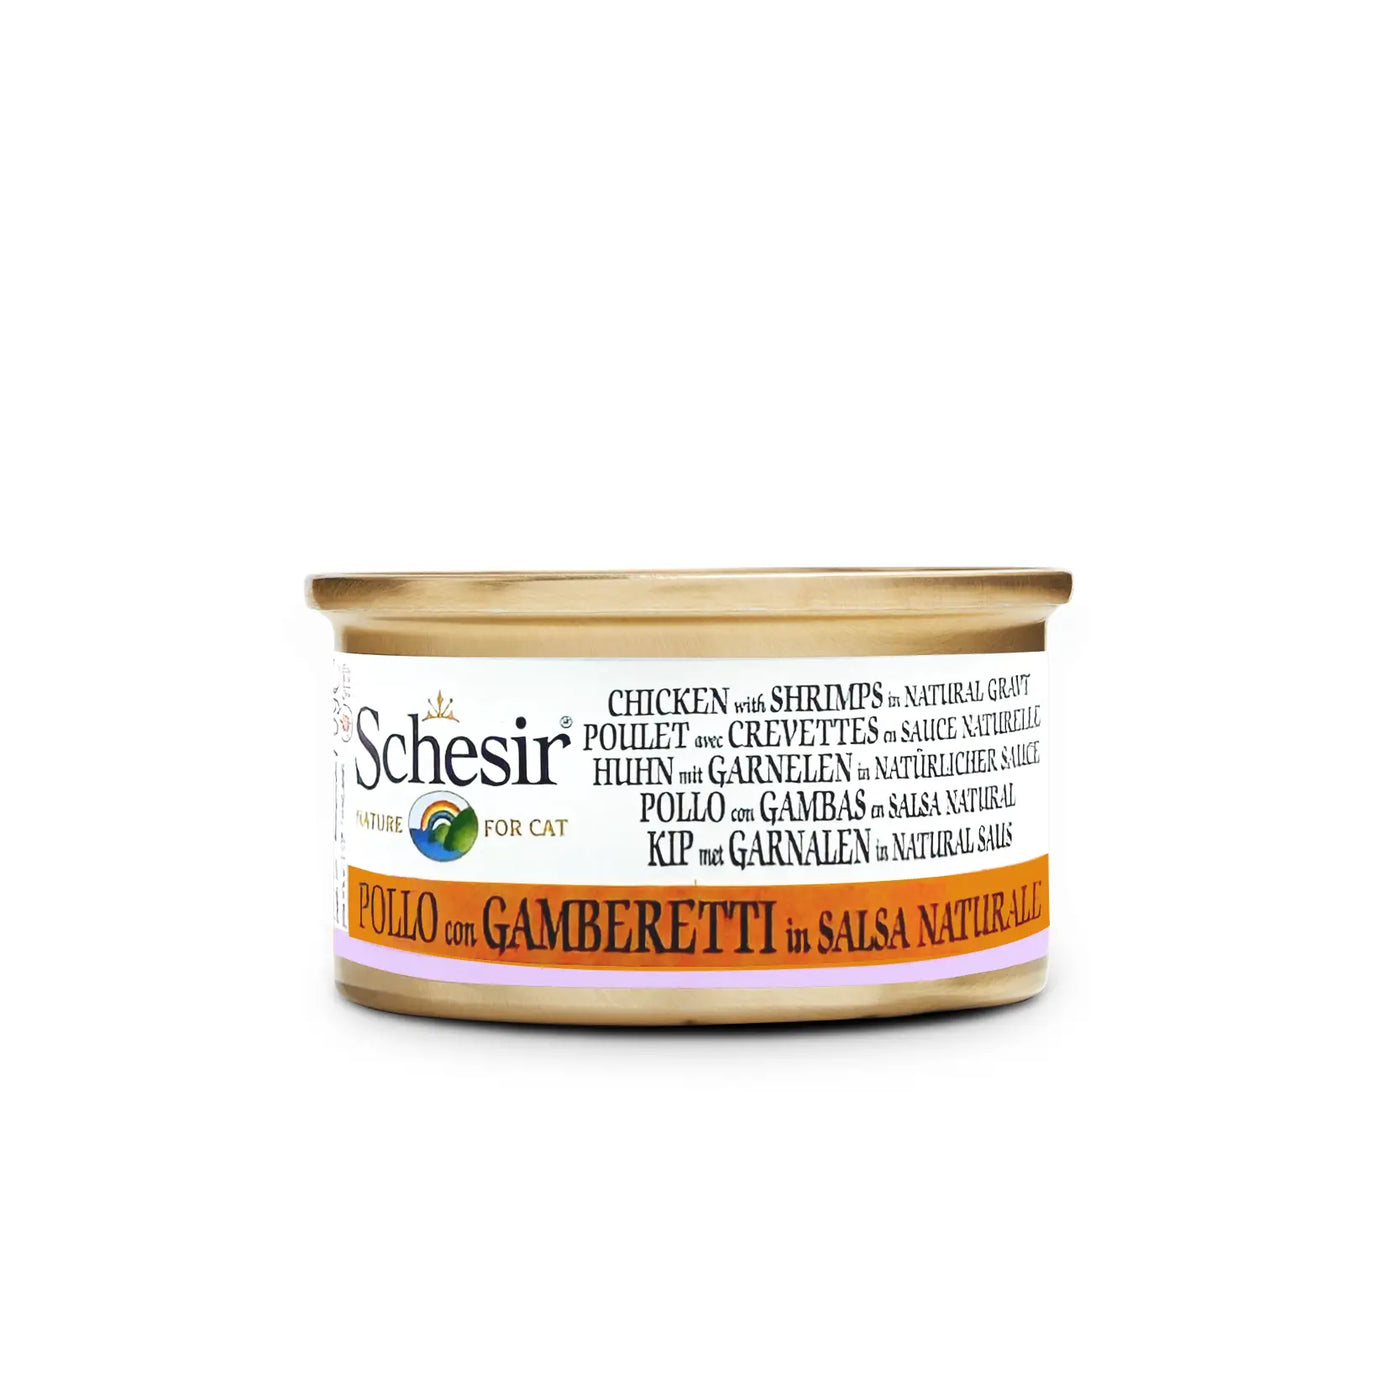 Schesir - Complementary Grain Free Wet Food for Adult Cats - Chicken with Shrimps in Natural Gravy 70g